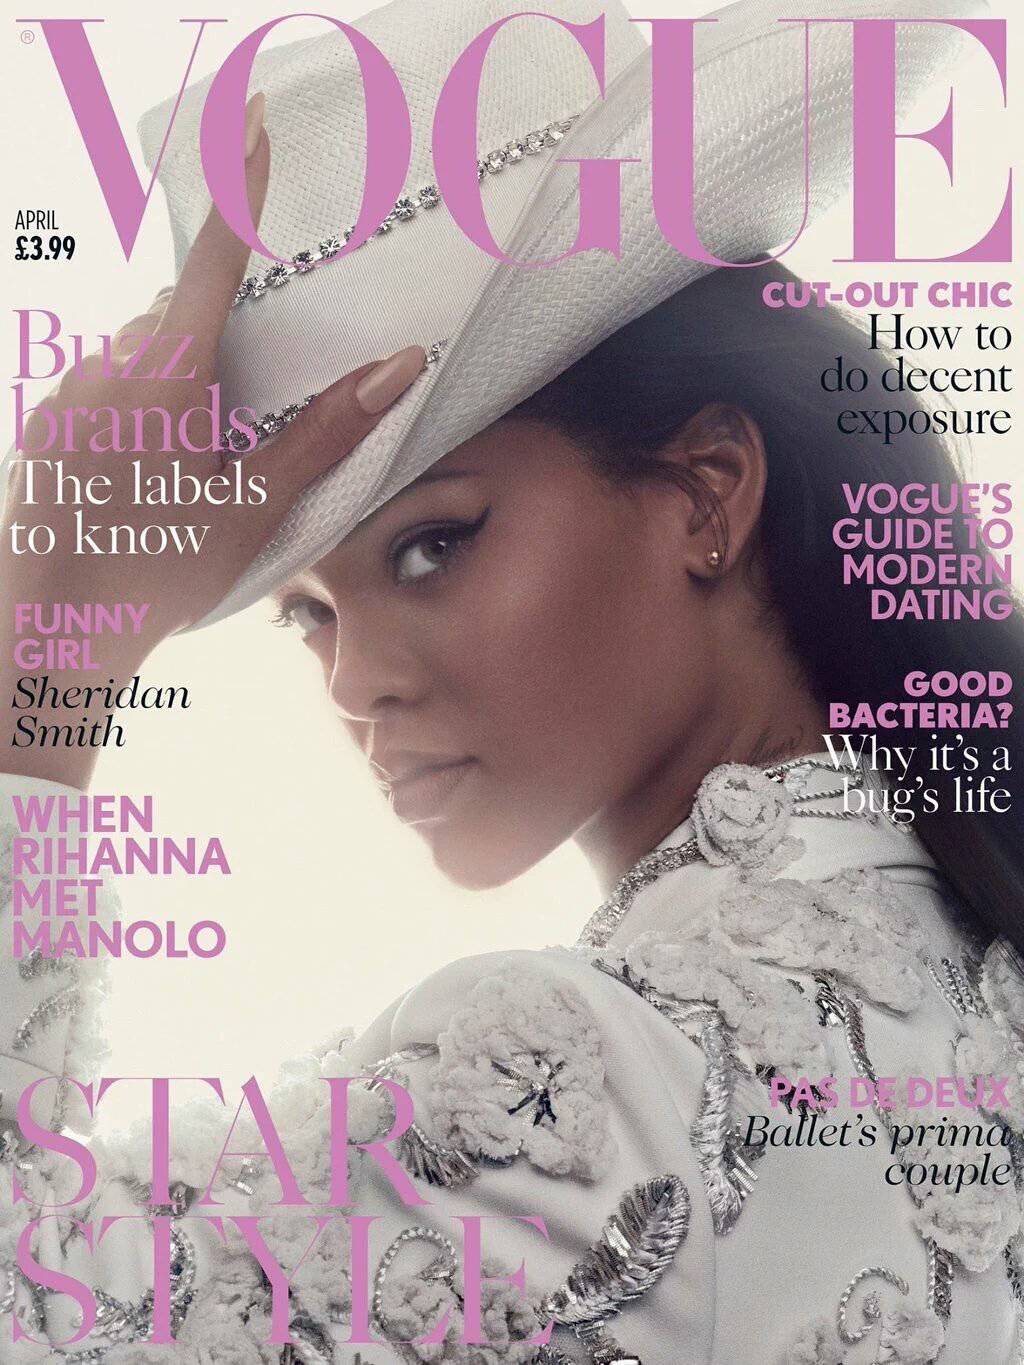 Lupita Nyong'o has more Vogue covers than Michelle Obama, Beyoncé, and  Rihanna in 3 years. Why?